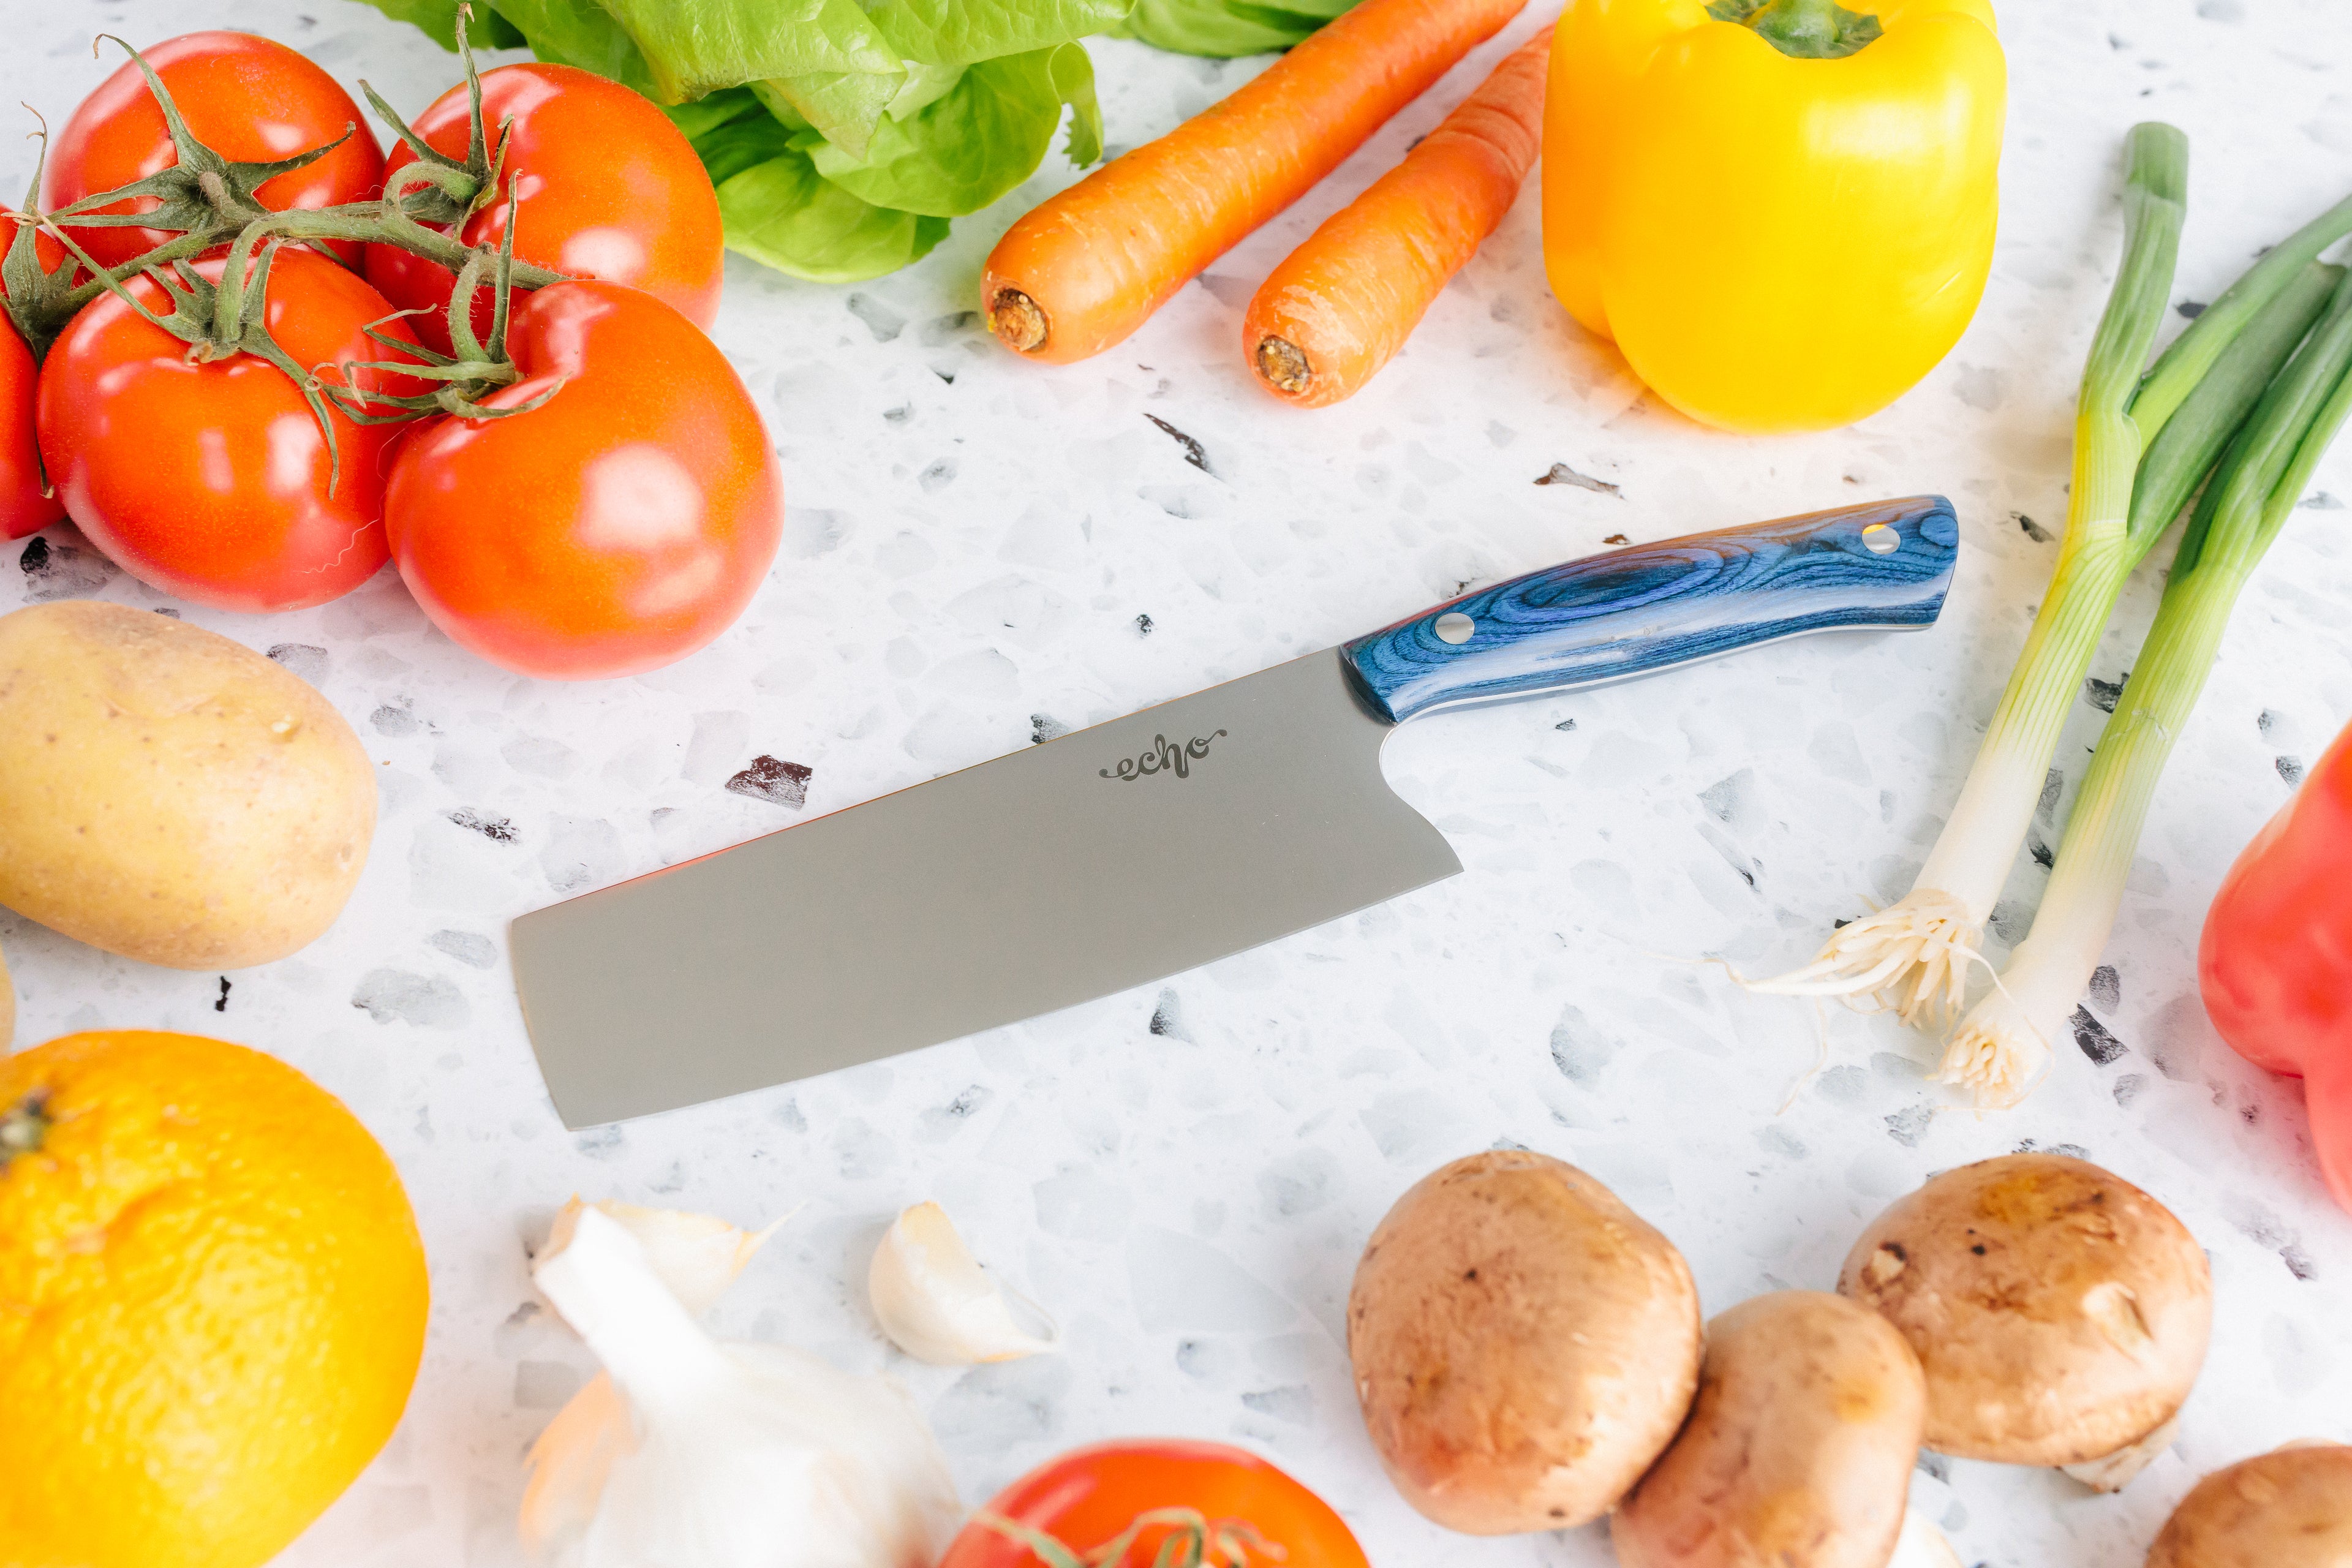 MIDDLETON MADE ECHO-LINE CHEF KNIFE REVIEW 